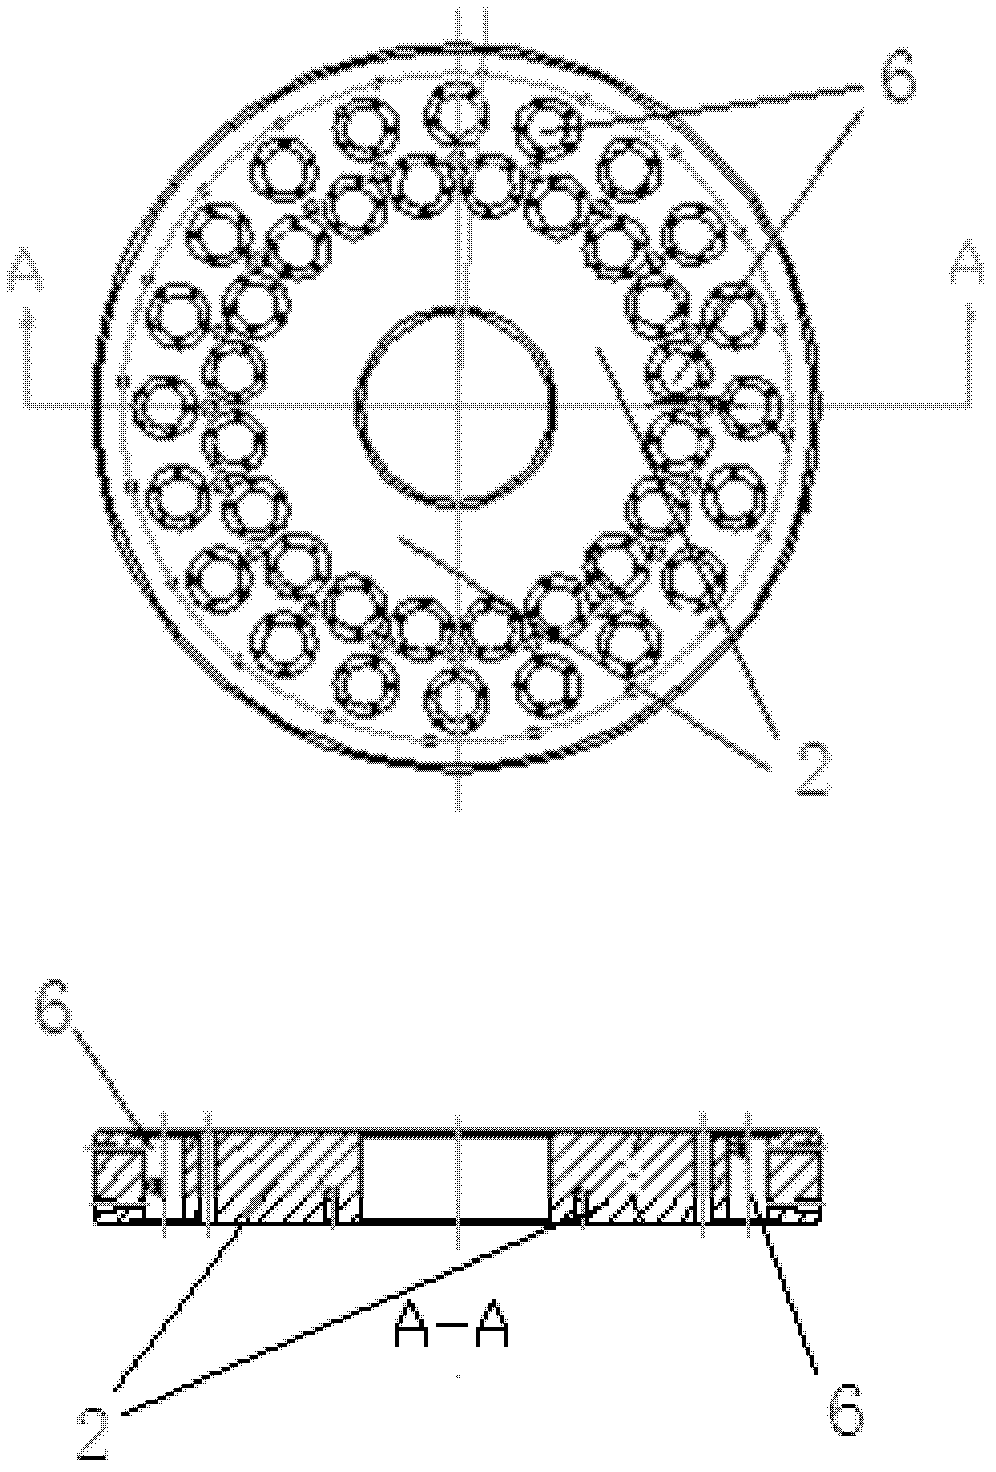 Movable valve hydraulic action system used for continuous adsorption switching equipment